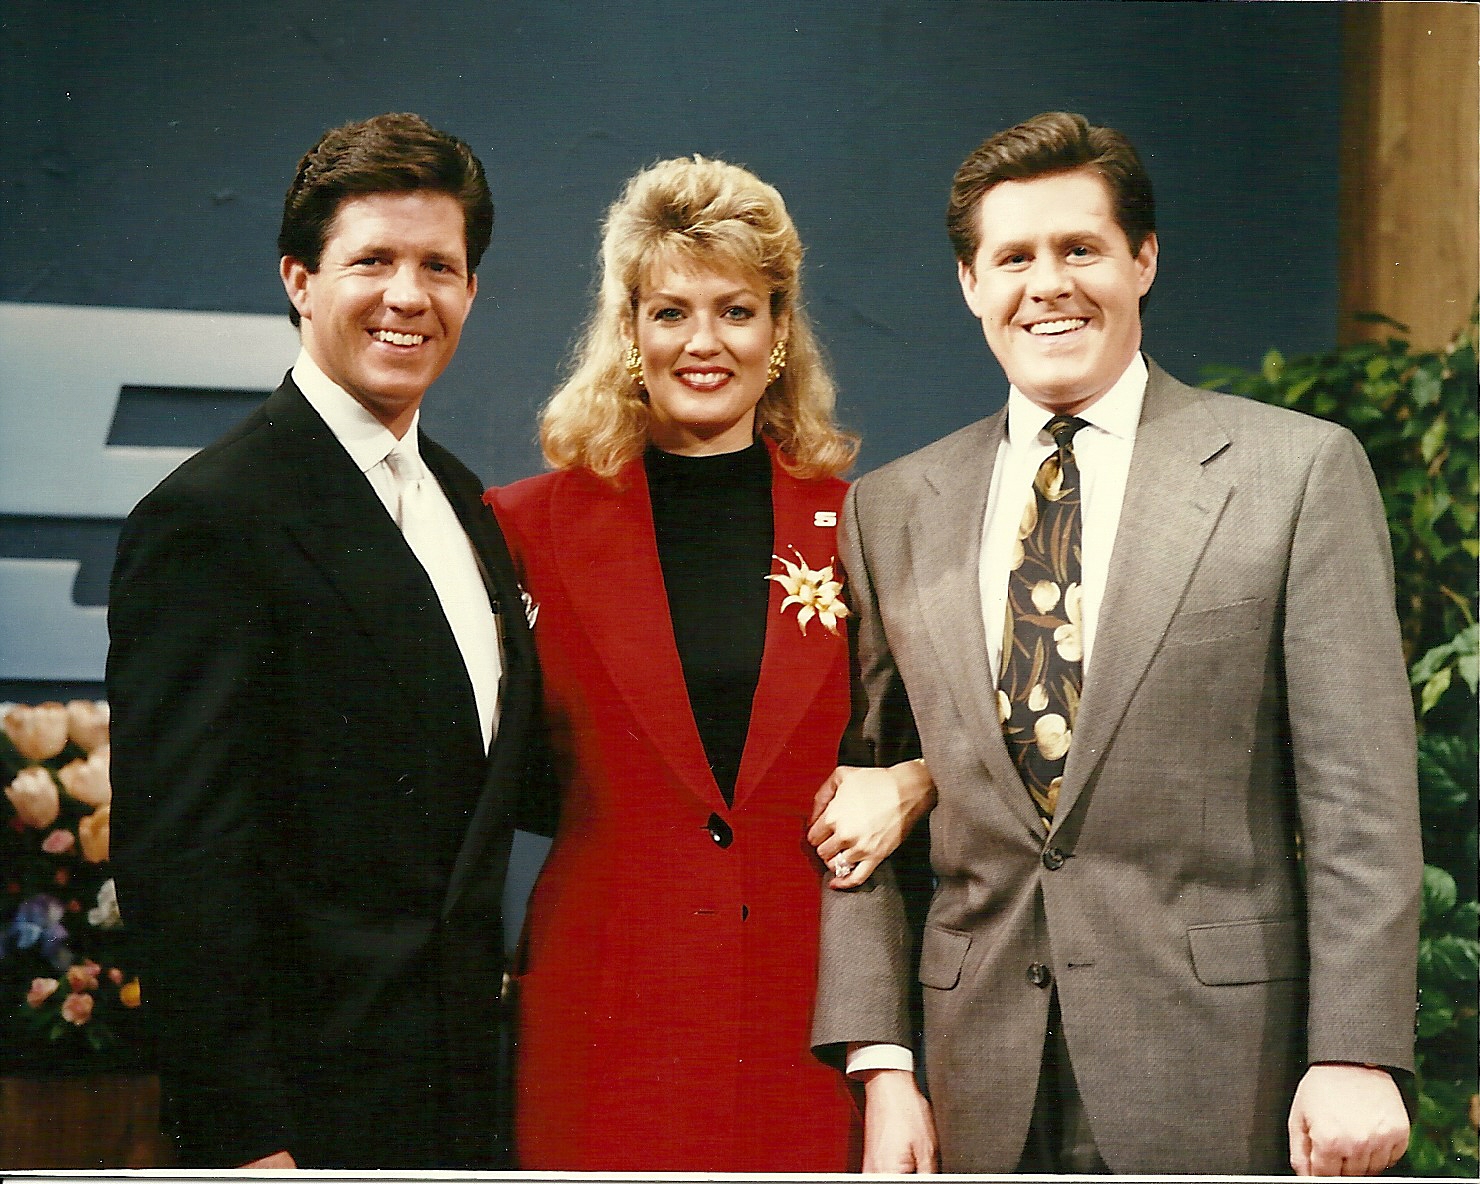 Mary Hart of Entertainment Tonight with the McCain Brothers on the set of Good Morning Oklahoma in Oklahoma City.